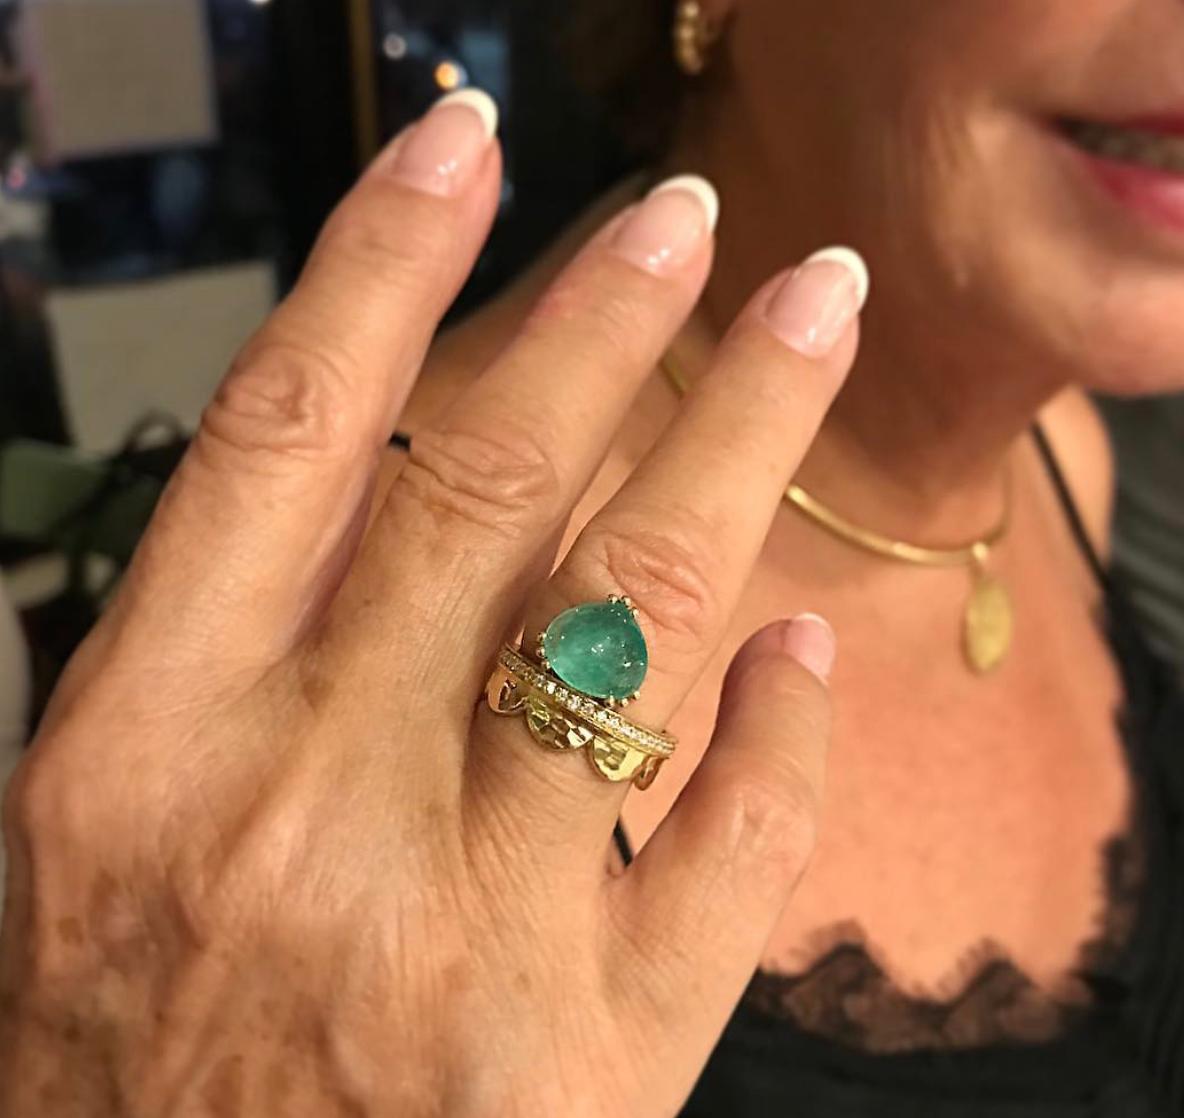 The Dana Bronfman X Muzo Emerald Fairmined Gold Agra Crown Ring is the result of a modern collaboration between the designer Dana Bronfman and ethical mine-to-market Colombian producer Muzo. The ring features a 2.96 tcw cabochon Muzo emerald with